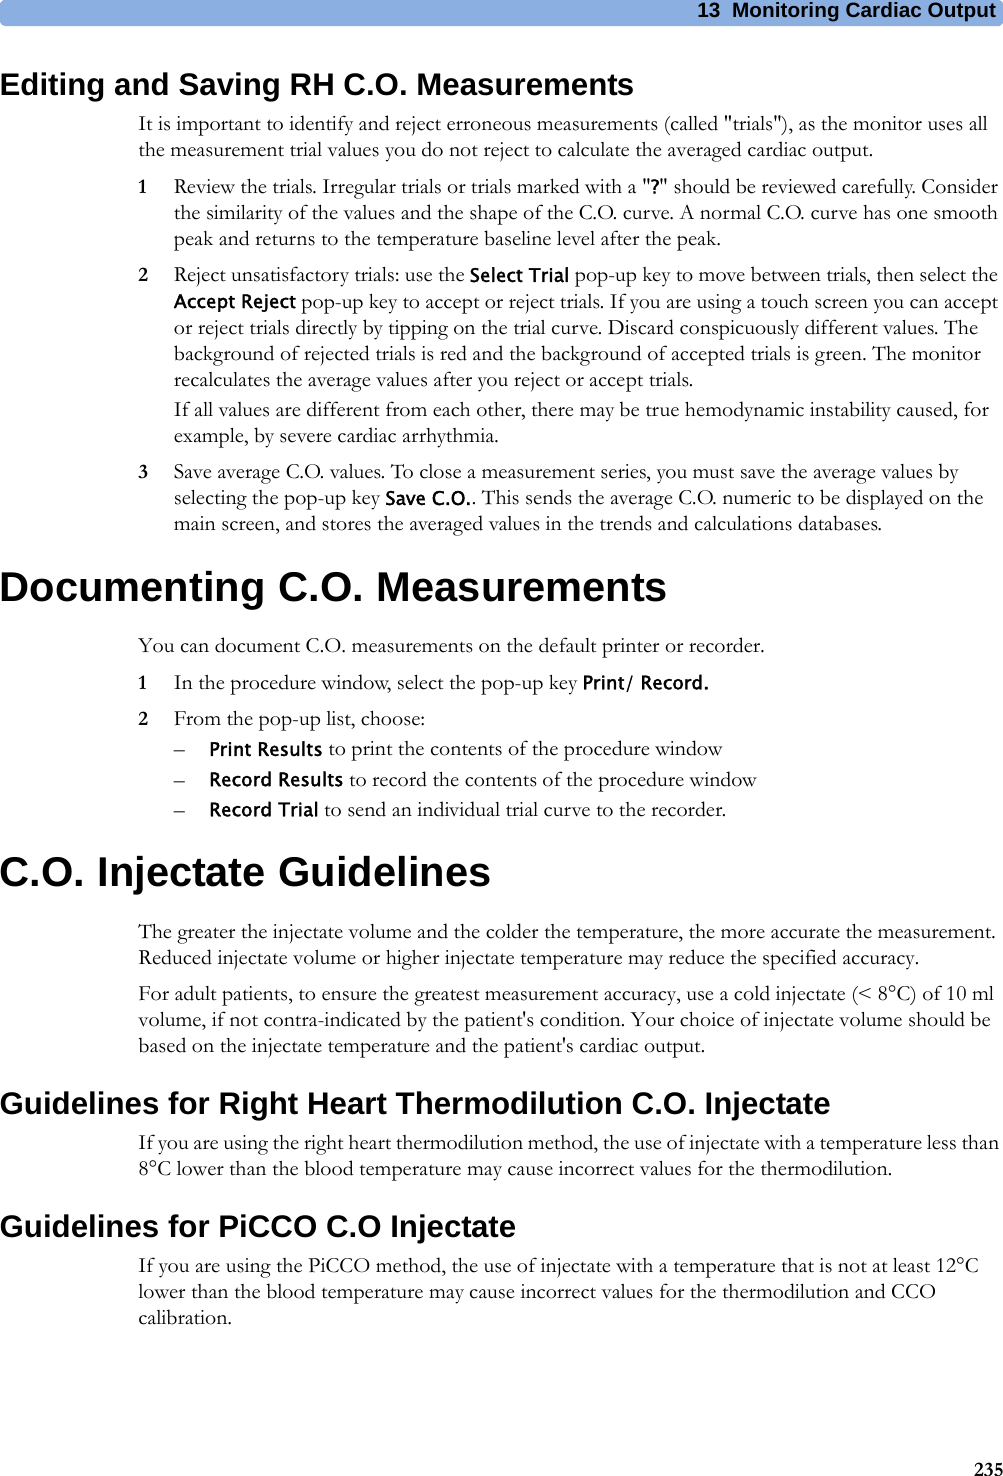 13 Monitoring Cardiac Output235Editing and Saving RH C.O. MeasurementsIt is important to identify and reject erroneous measurements (called &quot;trials&quot;), as the monitor uses all the measurement trial values you do not reject to calculate the averaged cardiac output.1Review the trials. Irregular trials or trials marked with a &quot;?&quot; should be reviewed carefully. Consider the similarity of the values and the shape of the C.O. curve. A normal C.O. curve has one smooth peak and returns to the temperature baseline level after the peak.2Reject unsatisfactory trials: use the Select Trial pop-up key to move between trials, then select the Accept Reject pop-up key to accept or reject trials. If you are using a touch screen you can accept or reject trials directly by tipping on the trial curve. Discard conspicuously different values. The background of rejected trials is red and the background of accepted trials is green. The monitor recalculates the average values after you reject or accept trials.If all values are different from each other, there may be true hemodynamic instability caused, for example, by severe cardiac arrhythmia.3Save average C.O. values. To close a measurement series, you must save the average values by selecting the pop-up key Save C.O.. This sends the average C.O. numeric to be displayed on the main screen, and stores the averaged values in the trends and calculations databases.Documenting C.O. MeasurementsYou can document C.O. measurements on the default printer or recorder.1In the procedure window, select the pop-up key Print/ Record.2From the pop-up list, choose:–Print Results to print the contents of the procedure window–Record Results to record the contents of the procedure window–Record Trial to send an individual trial curve to the recorder.C.O. Injectate GuidelinesThe greater the injectate volume and the colder the temperature, the more accurate the measurement. Reduced injectate volume or higher injectate temperature may reduce the specified accuracy.For adult patients, to ensure the greatest measurement accuracy, use a cold injectate (&lt; 8°C) of 10 ml volume, if not contra-indicated by the patient&apos;s condition. Your choice of injectate volume should be based on the injectate temperature and the patient&apos;s cardiac output.Guidelines for Right Heart Thermodilution C.O. InjectateIf you are using the right heart thermodilution method, the use of injectate with a temperature less than 8°C lower than the blood temperature may cause incorrect values for the thermodilution.Guidelines for PiCCO C.O InjectateIf you are using the PiCCO method, the use of injectate with a temperature that is not at least 12°C lower than the blood temperature may cause incorrect values for the thermodilution and CCO calibration.